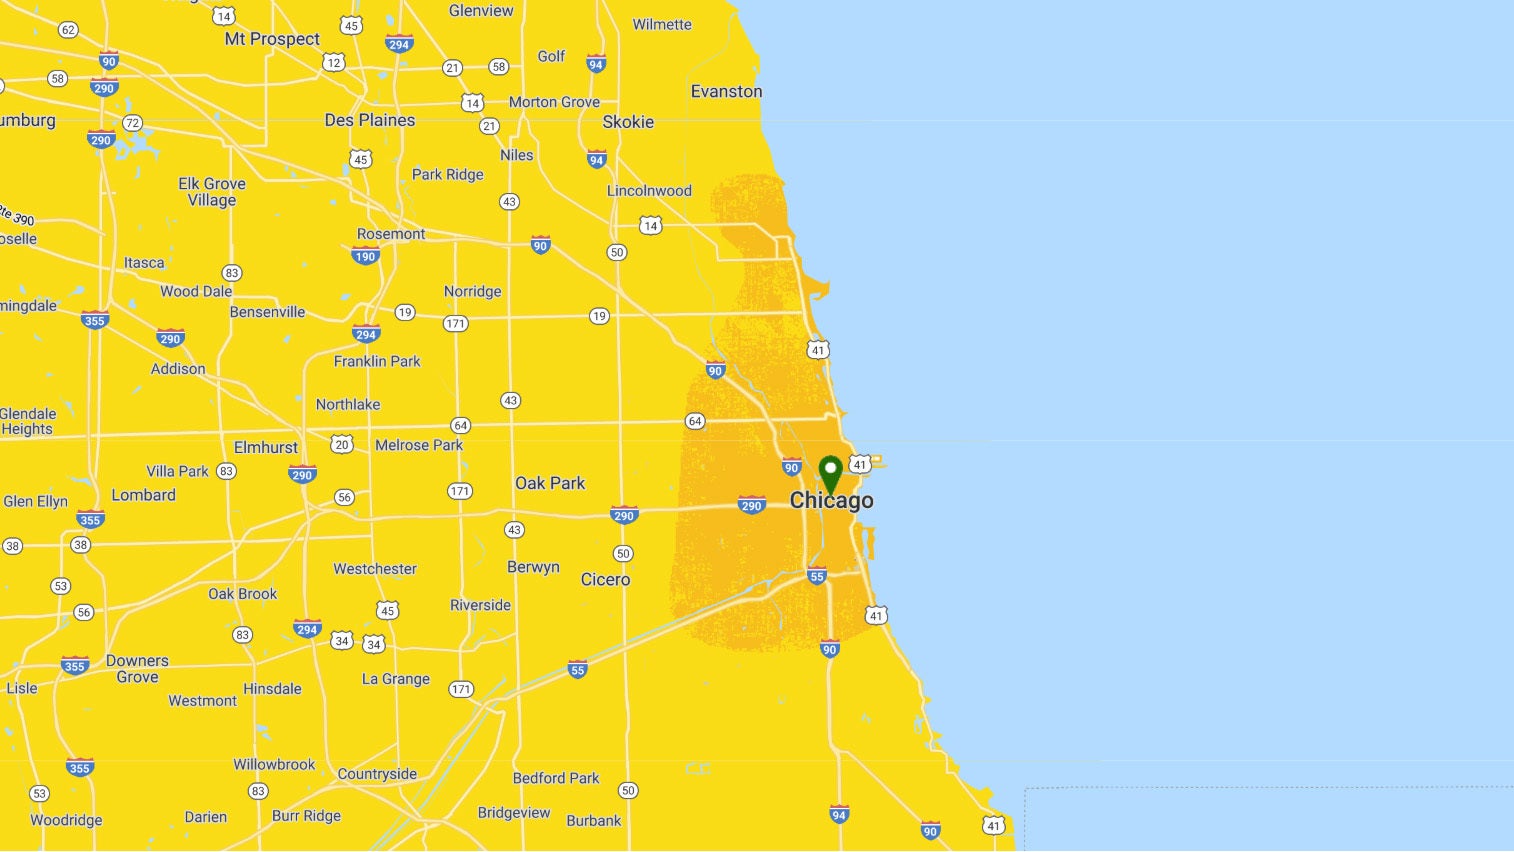 Chicago 5G coverage as of July 11th, 2019 - Sprint expands its 5G network to one more city in the US